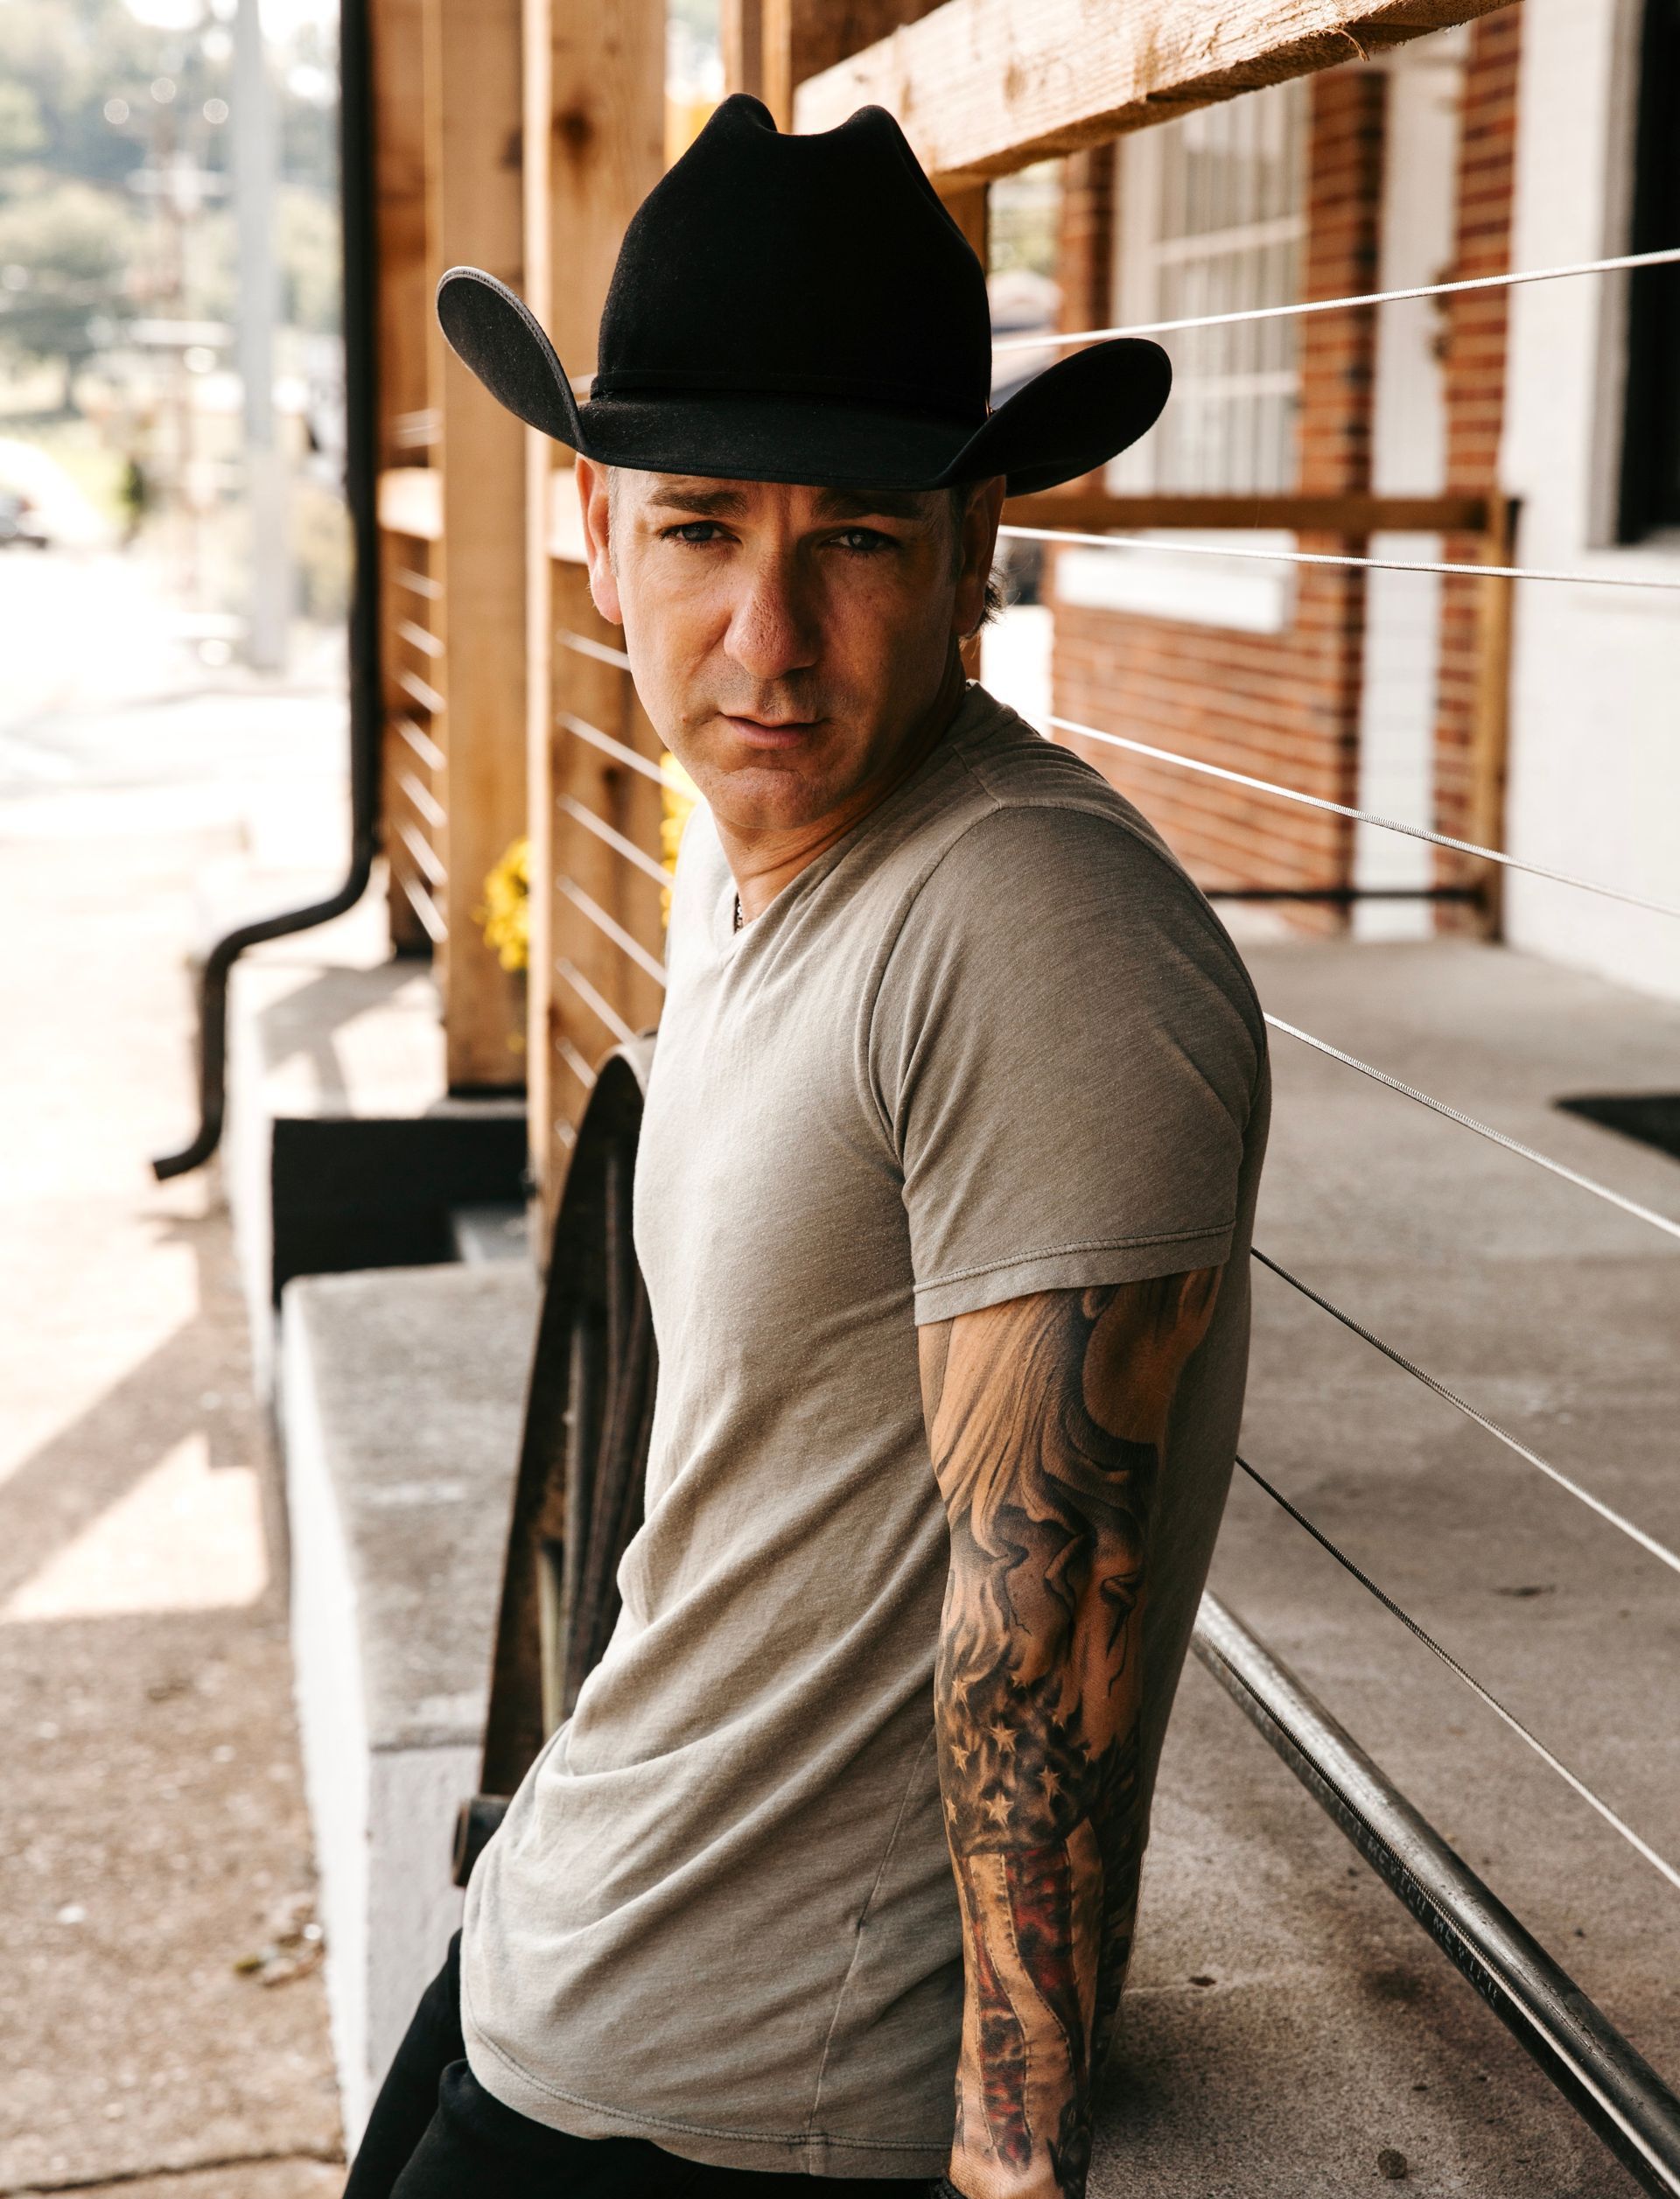 A man with a tattoo on his arm is wearing a cowboy hat.